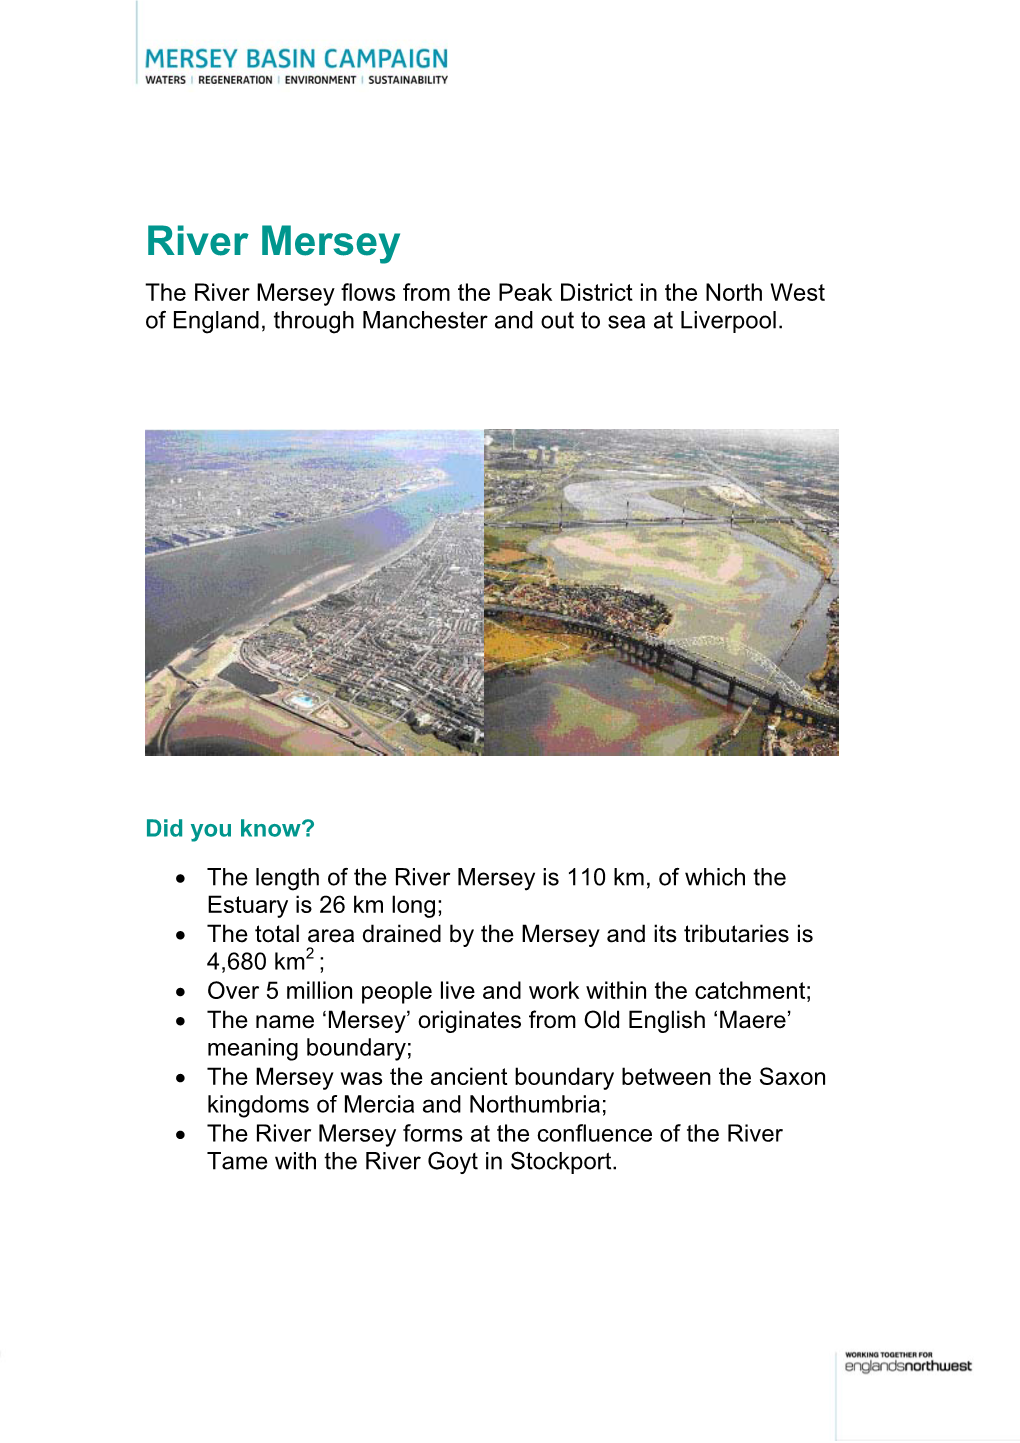 River Mersey the River Mersey Flows from the Peak District in the North West of England, Through Manchester and out to Sea at Liverpool